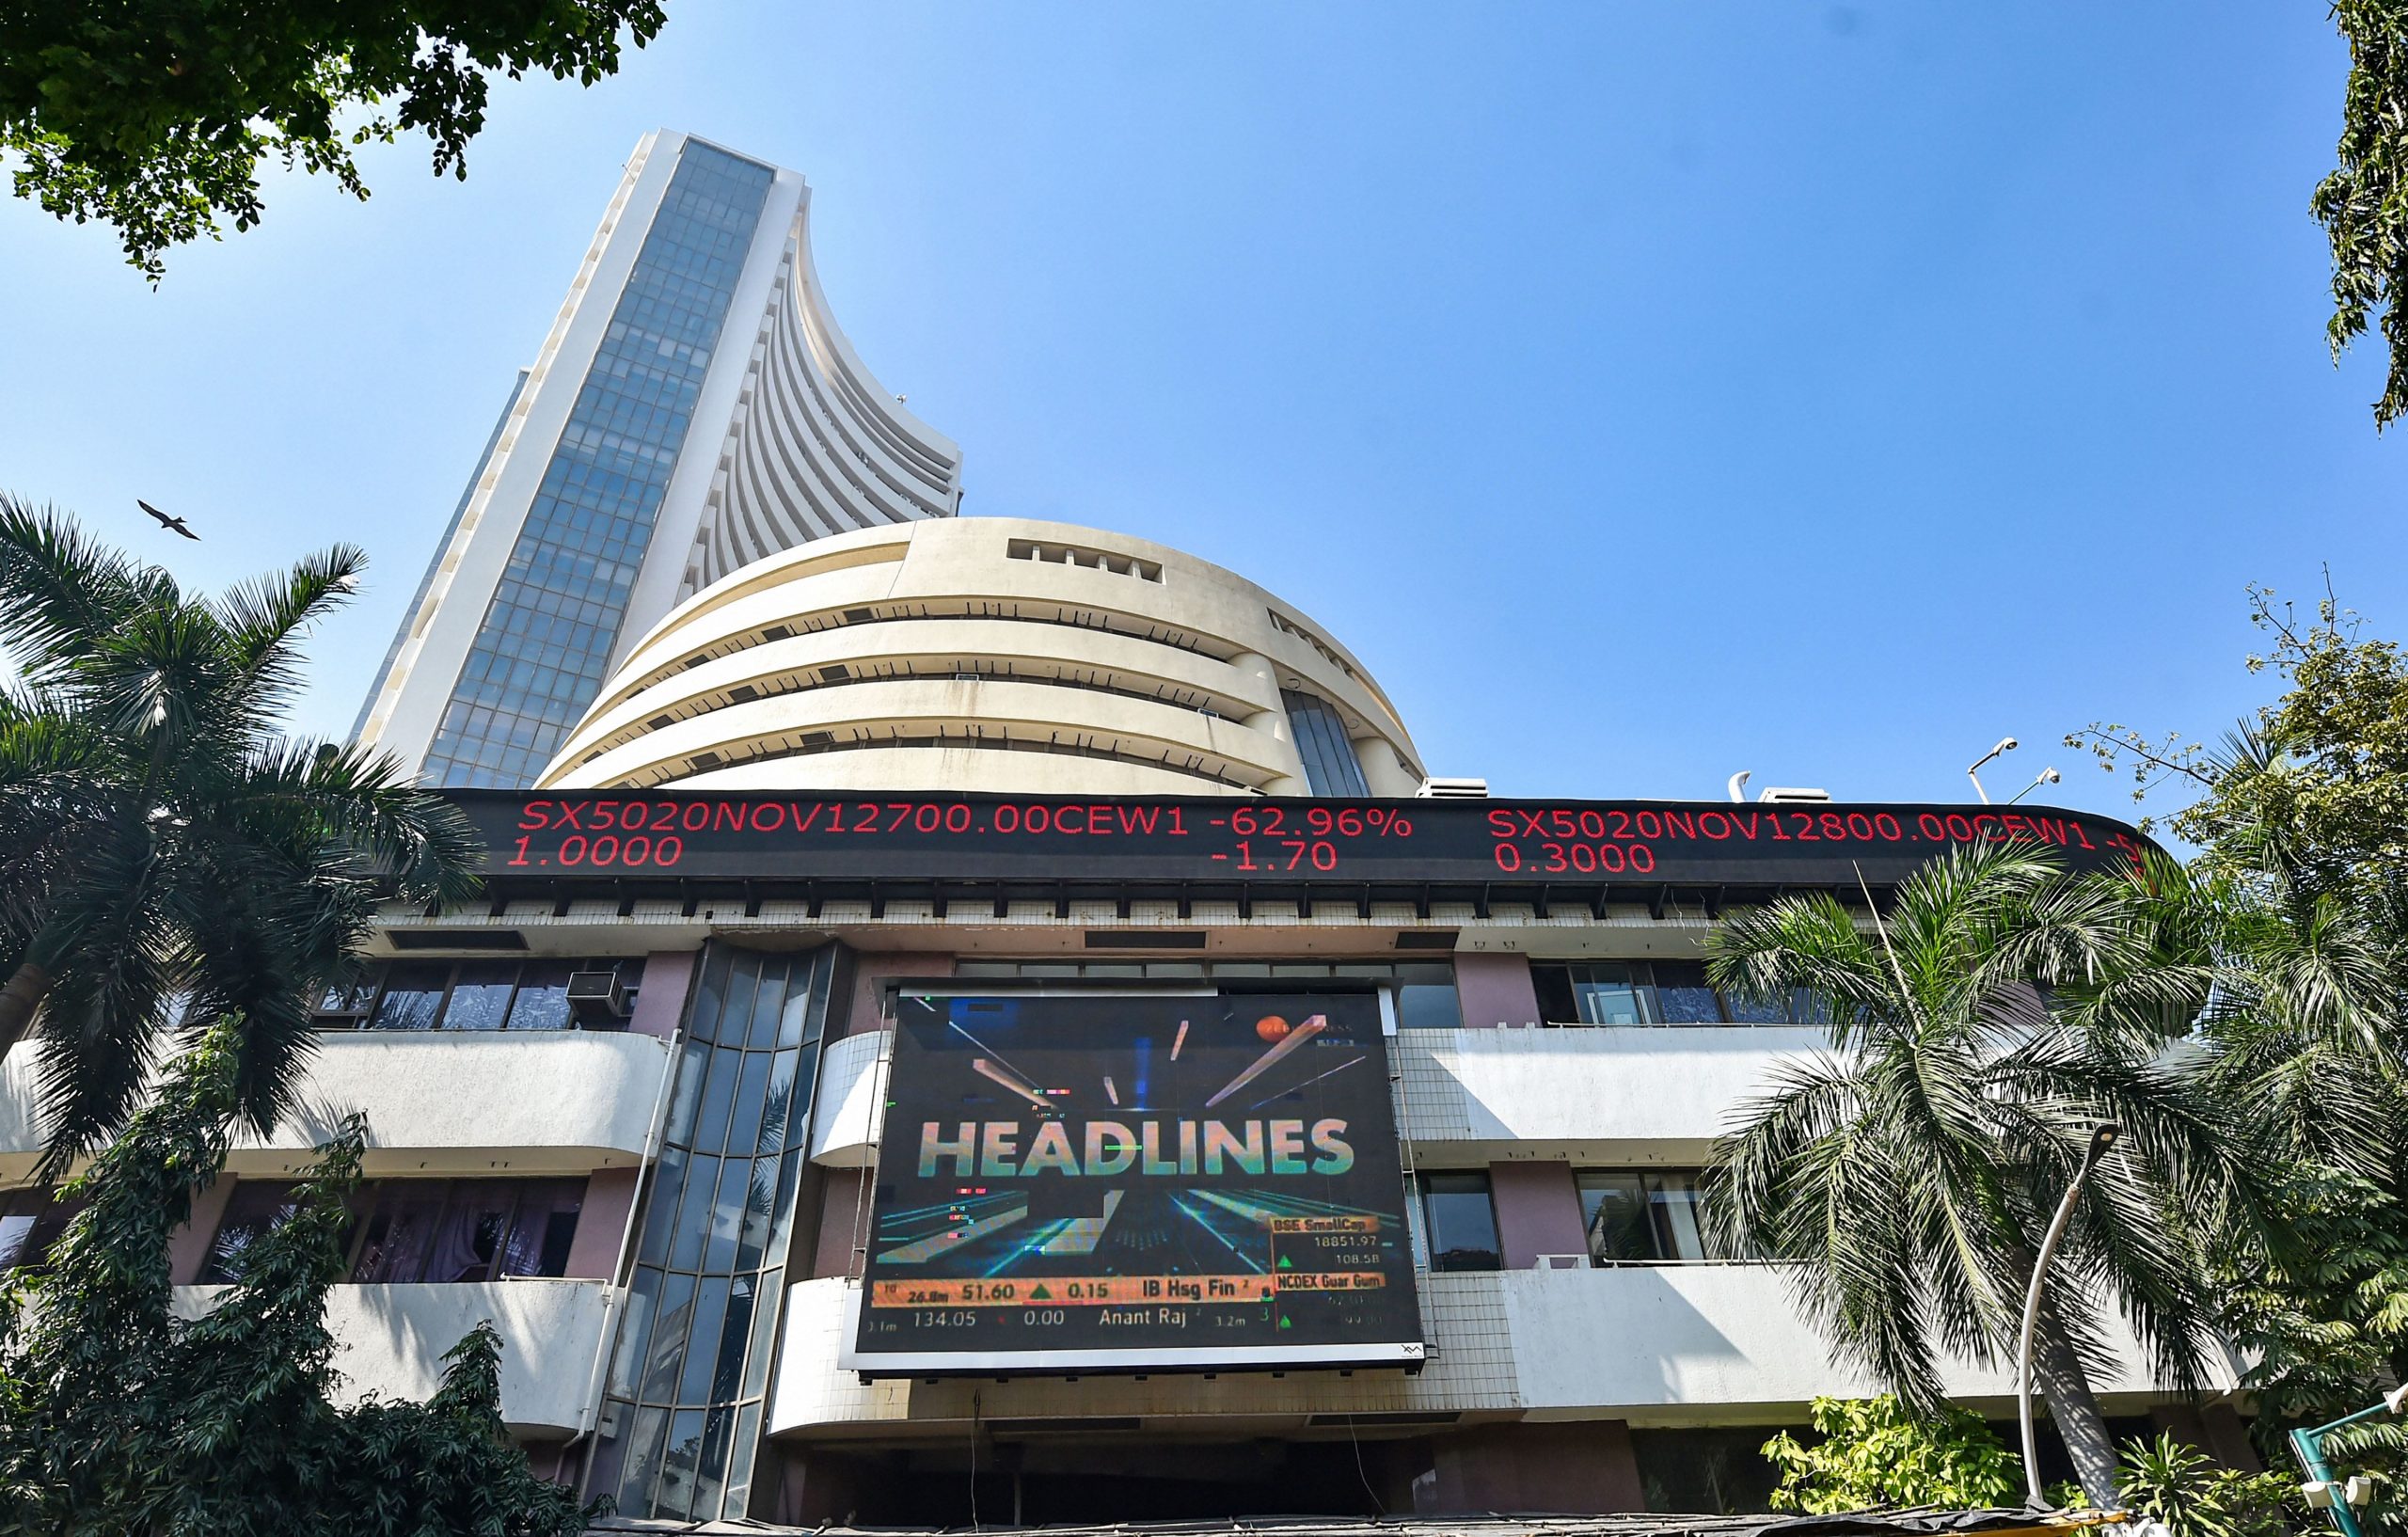 Trending Stocks: Adani Power, Ceat, Blue Dart, Dabur and others in news today